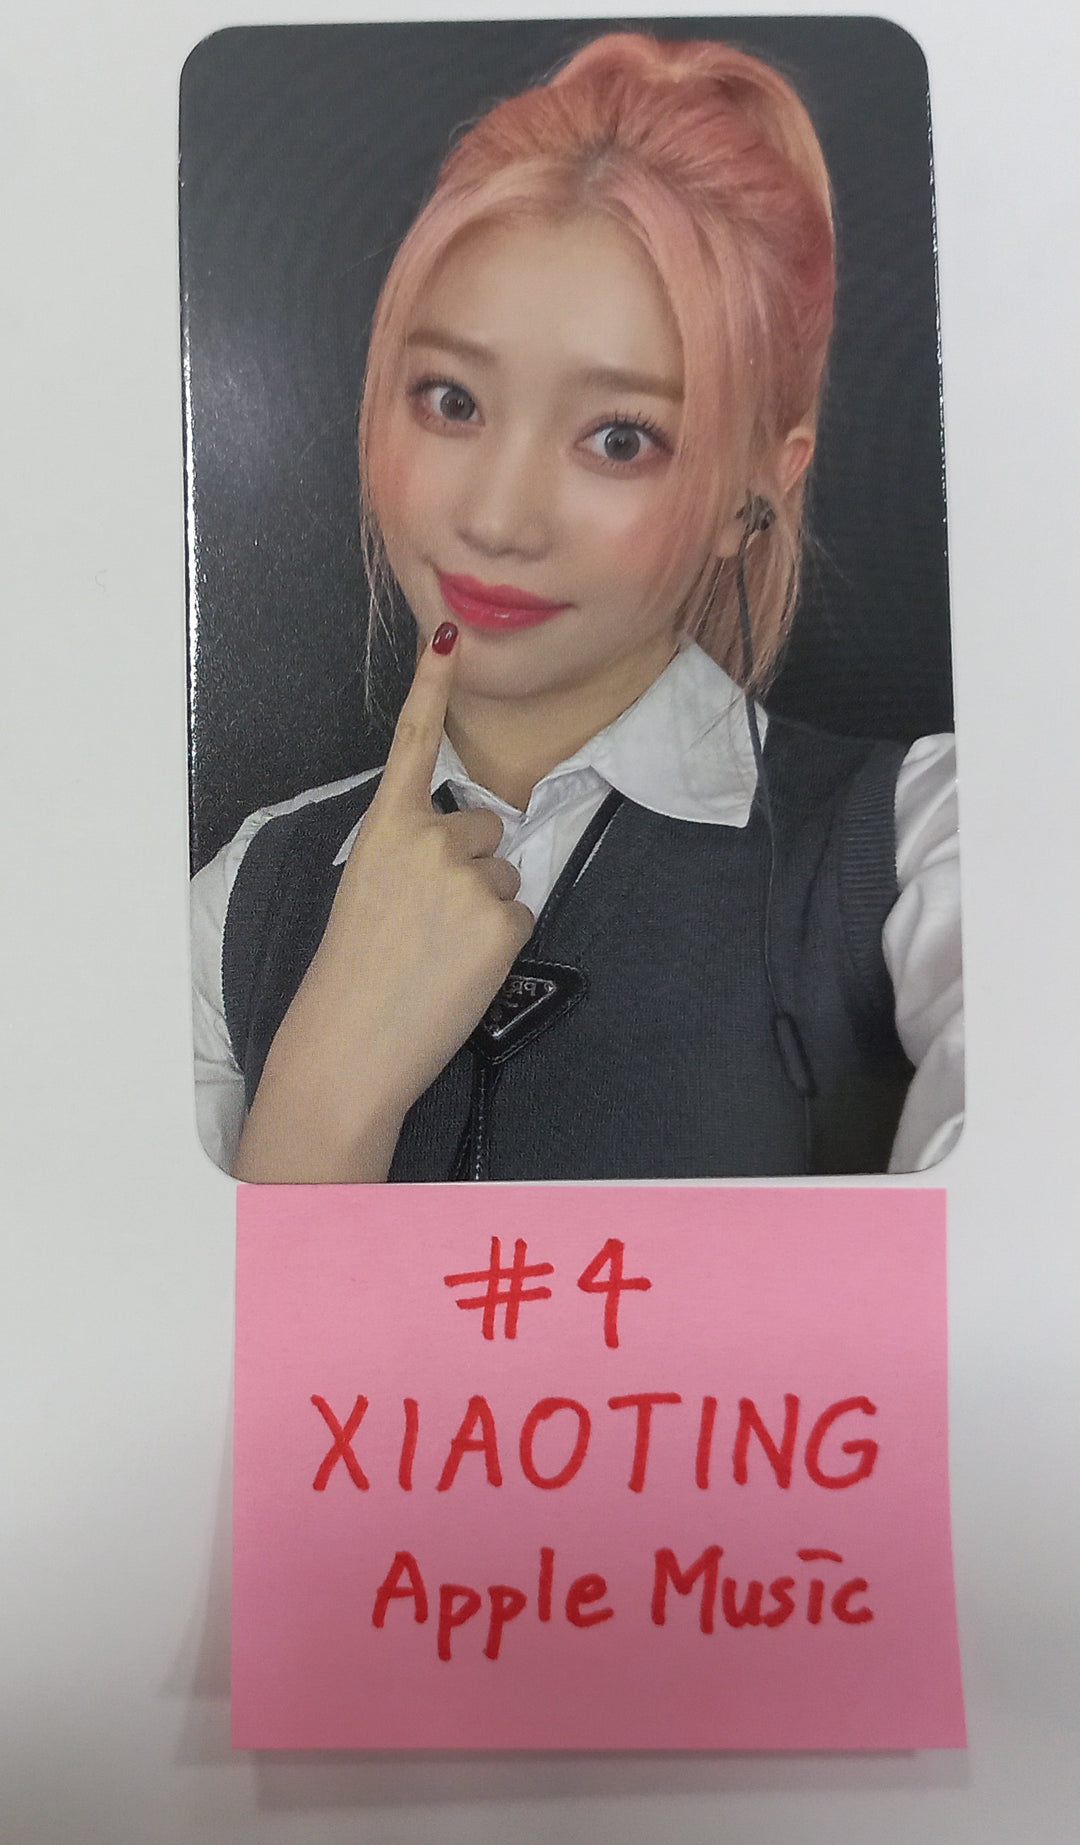 Kep1er "Magic Hour" - Apple Music Fansign Event Photocard Round 2 [23.10.31]